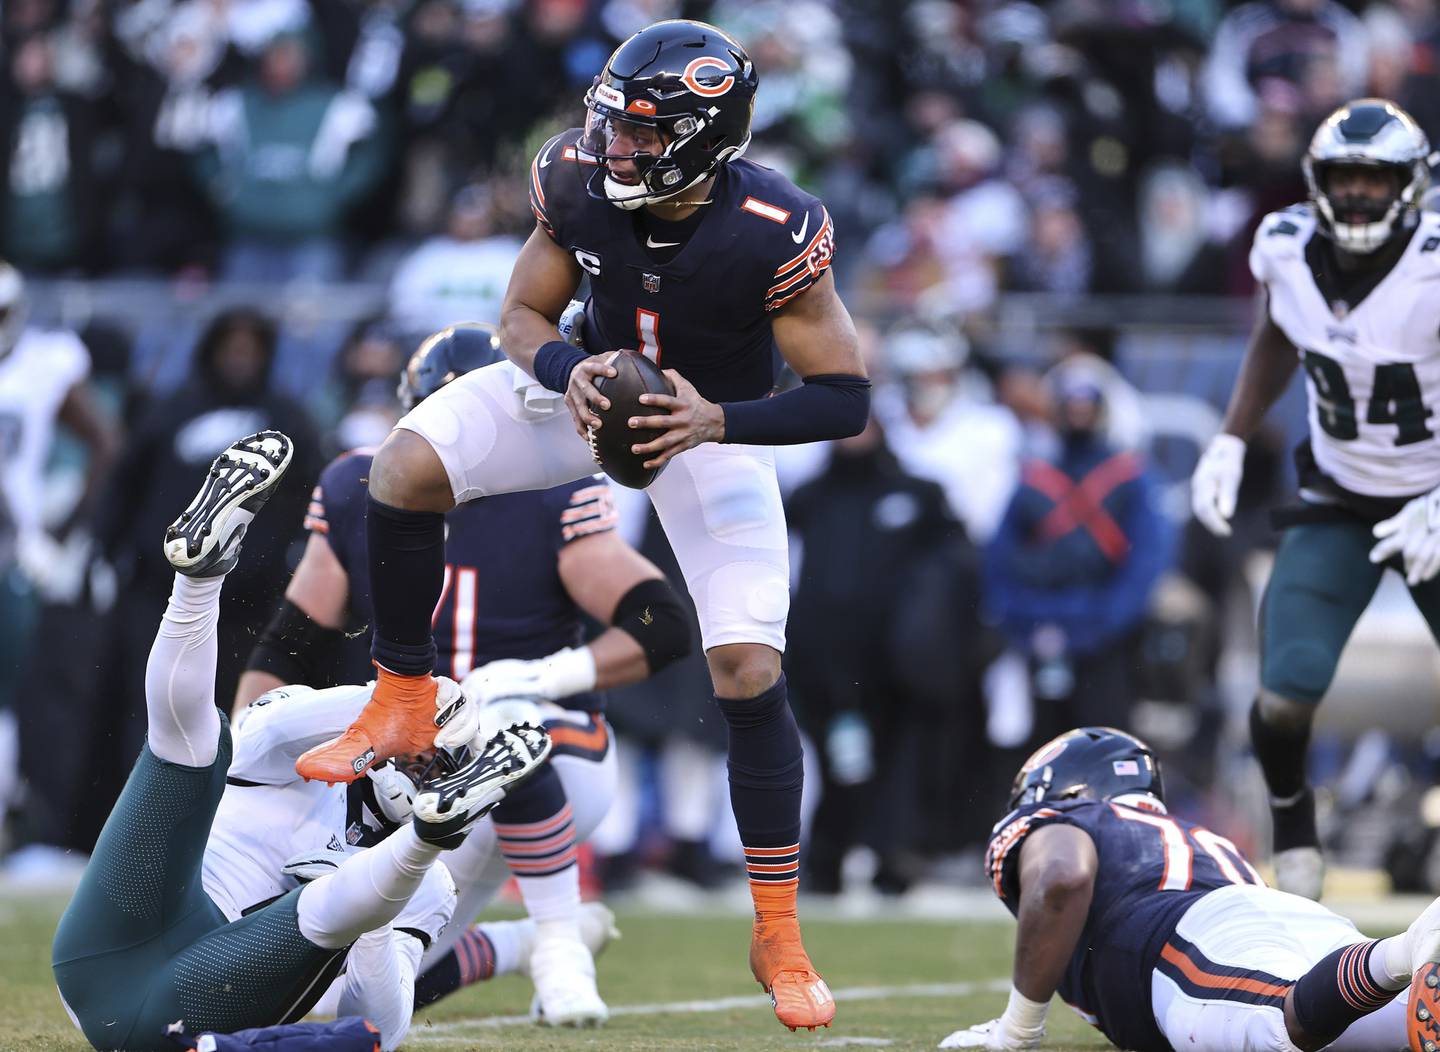 Bears quarterback Justin Fields (1) hops as he eludes the Eagles defense in the fourth quarter Sunday, Dec. 18, 2022, at Soldier Field. Fields briefly left the game after the play with what he said were cramps and received IV fluids in the locker room before returning on the next drive.